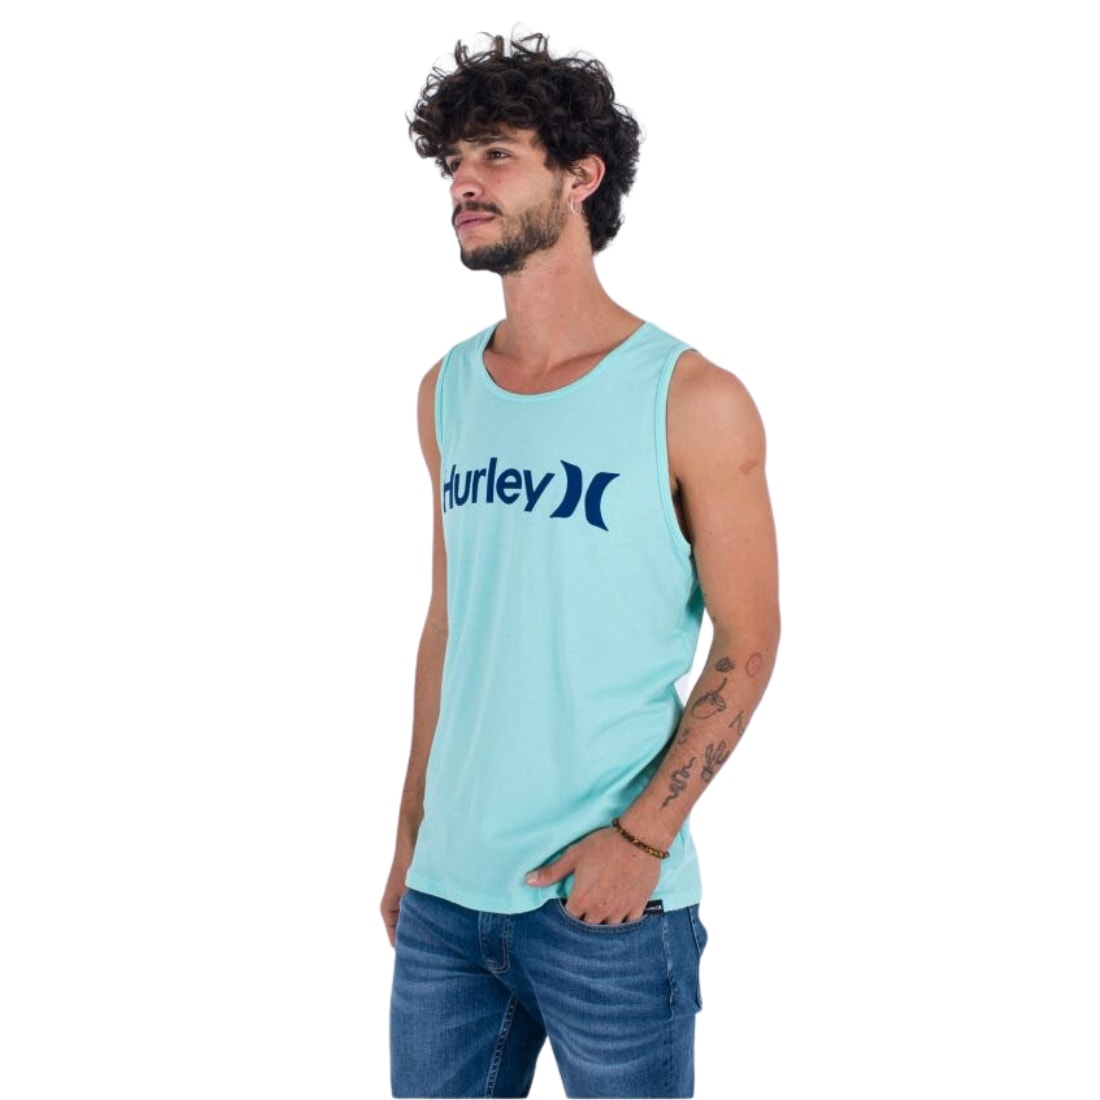 Hurley Everyday One &amp; Only Solid Tank Top Vest - Tropical Mist Heather - Mens Surf Brand Vest/Tank Top by Hurley